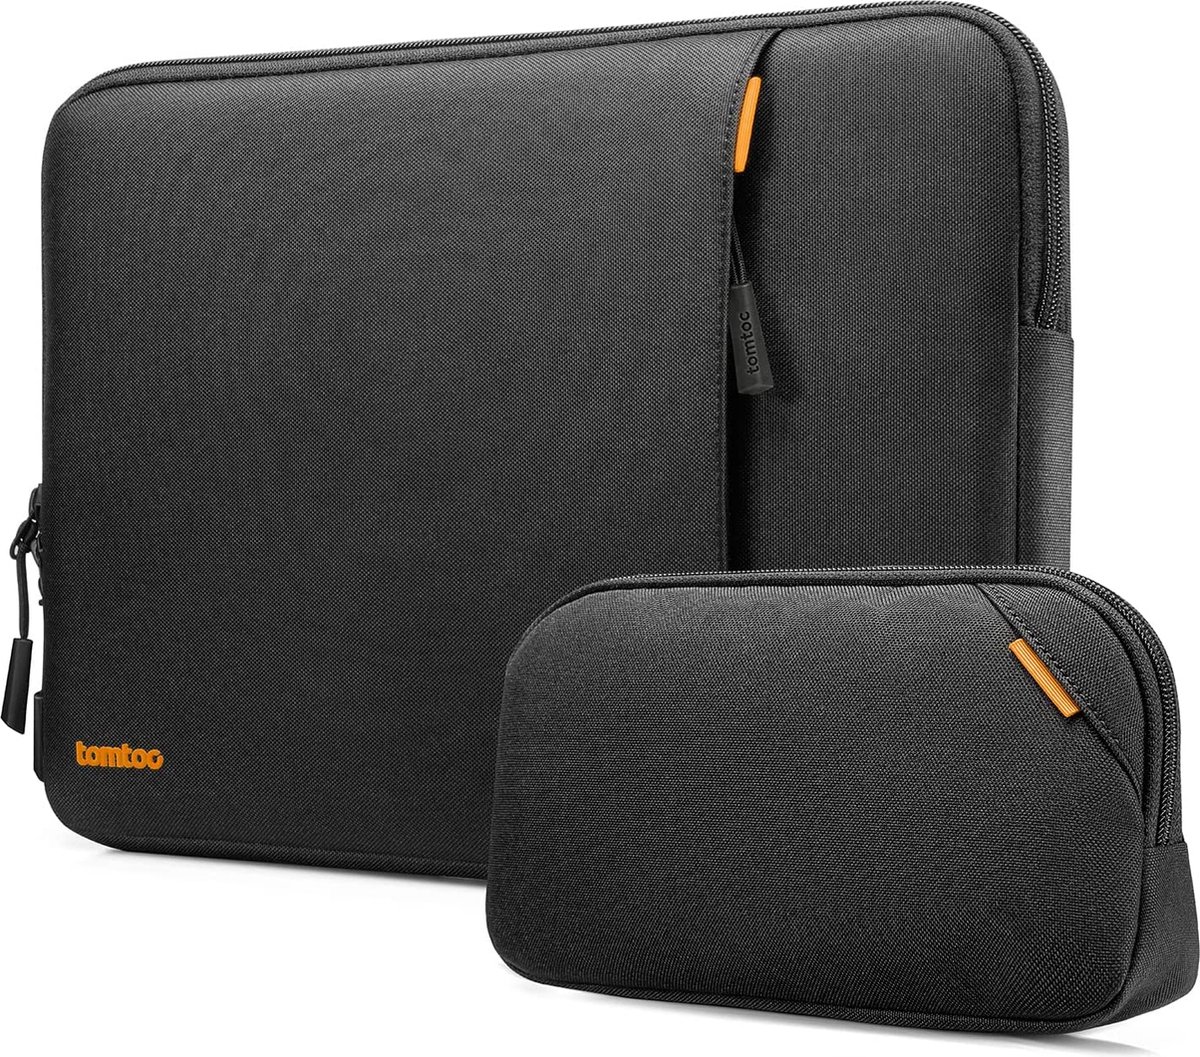 1. Best Laptop Sleeve: Tomtoc 360° Protective 13-13.5 Inch